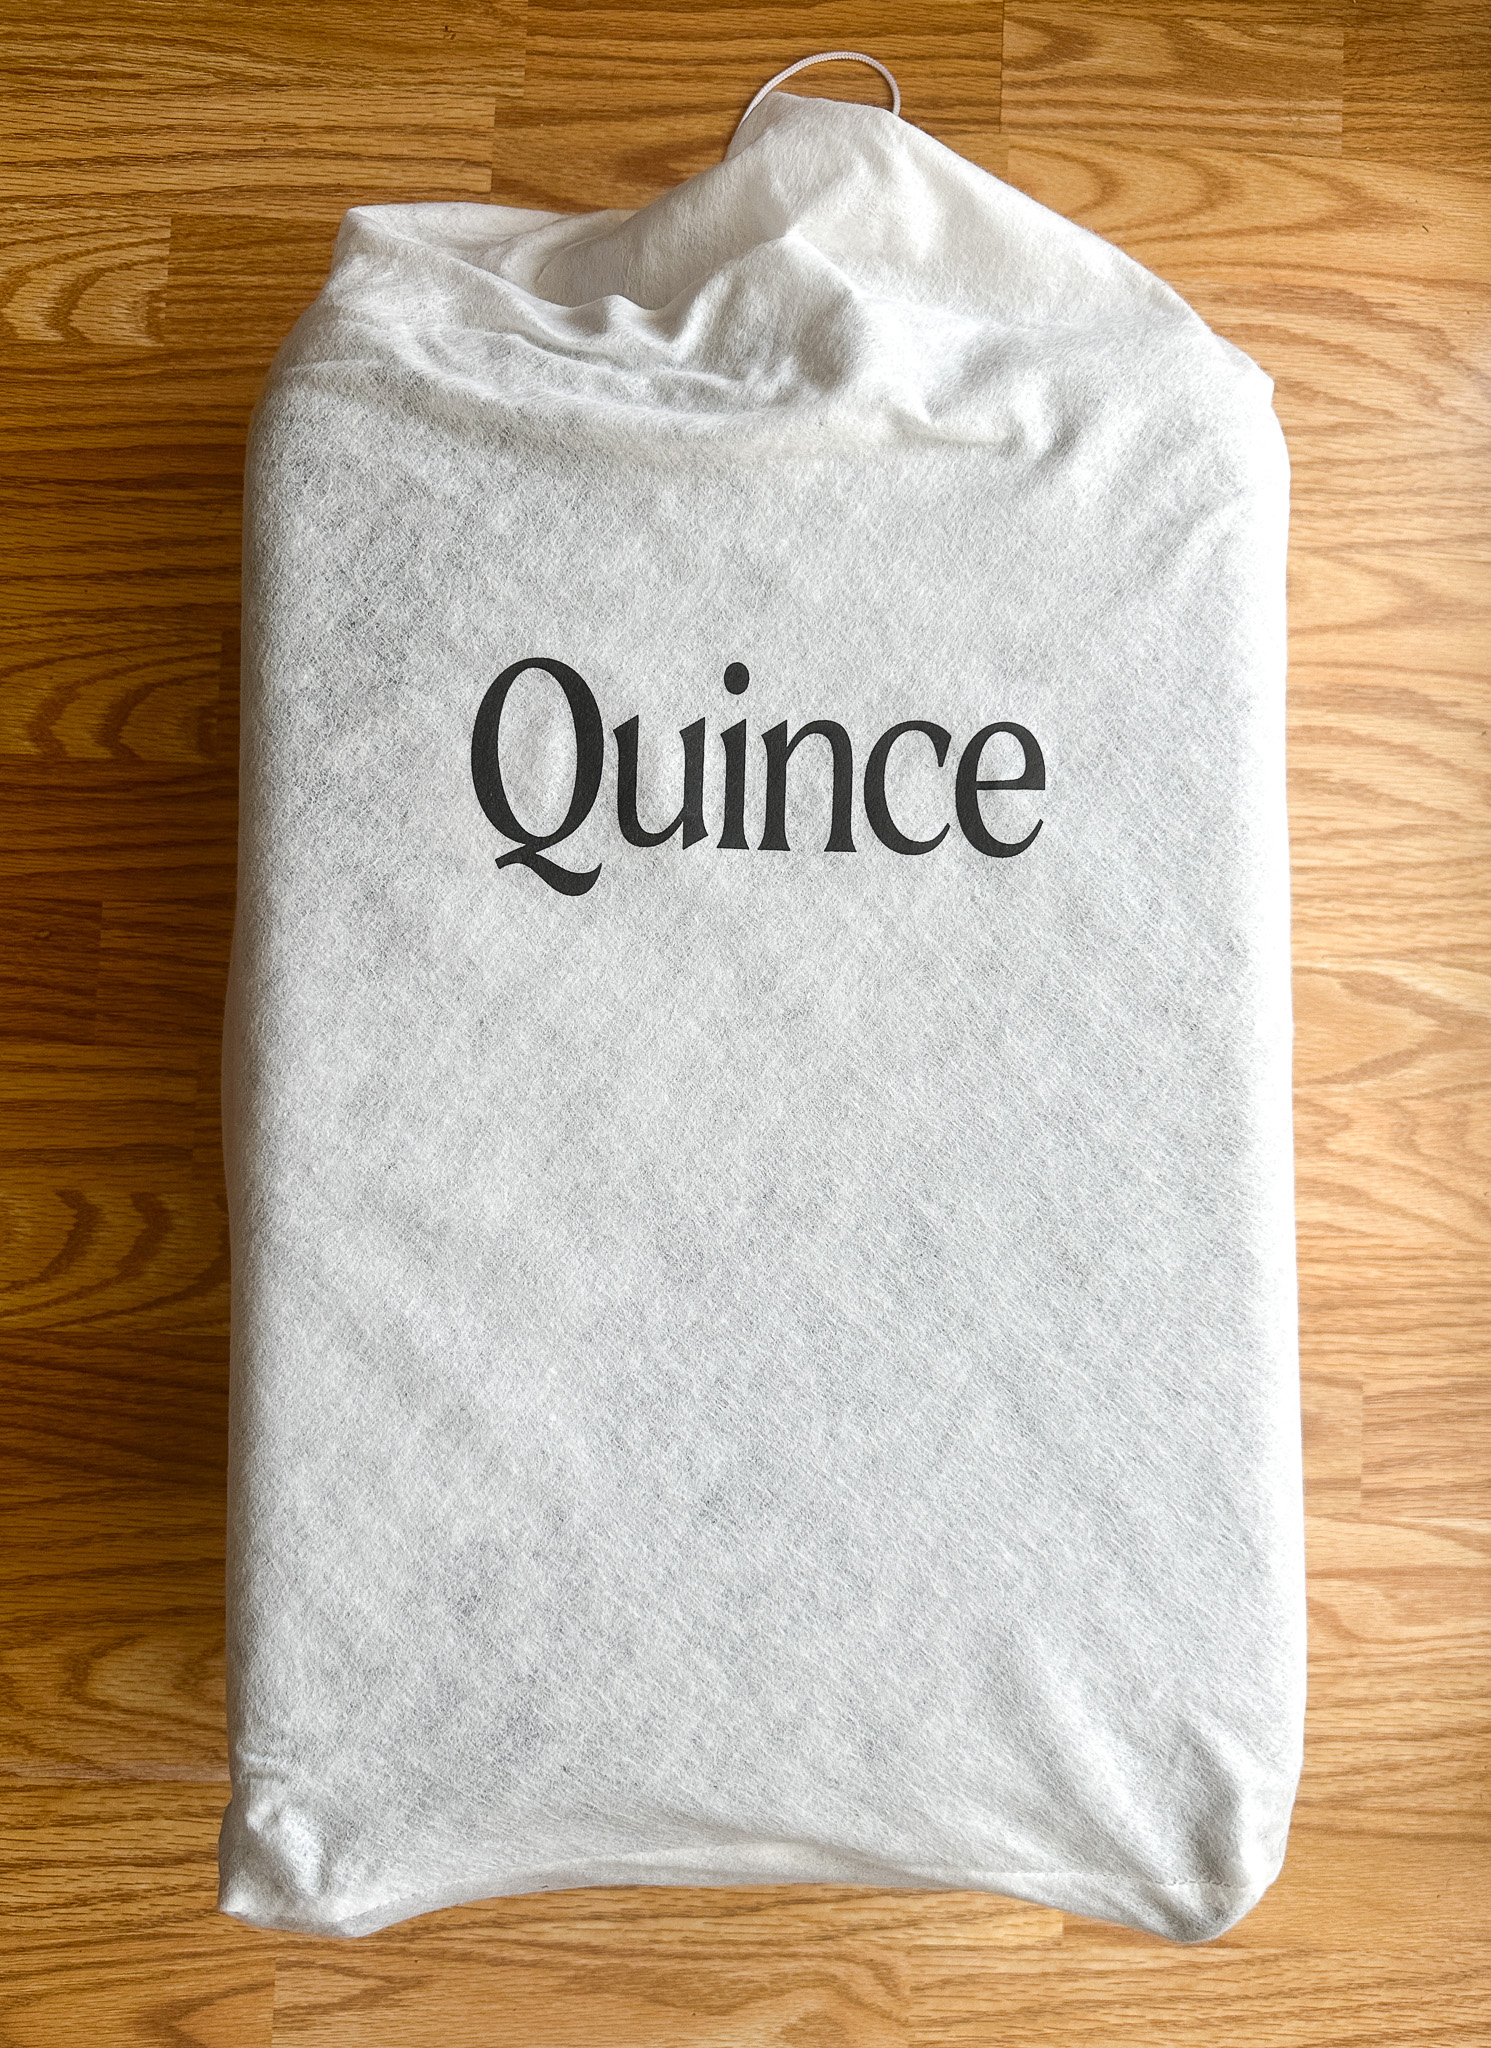 Quince Carry-On Luggage drawstring storage bag